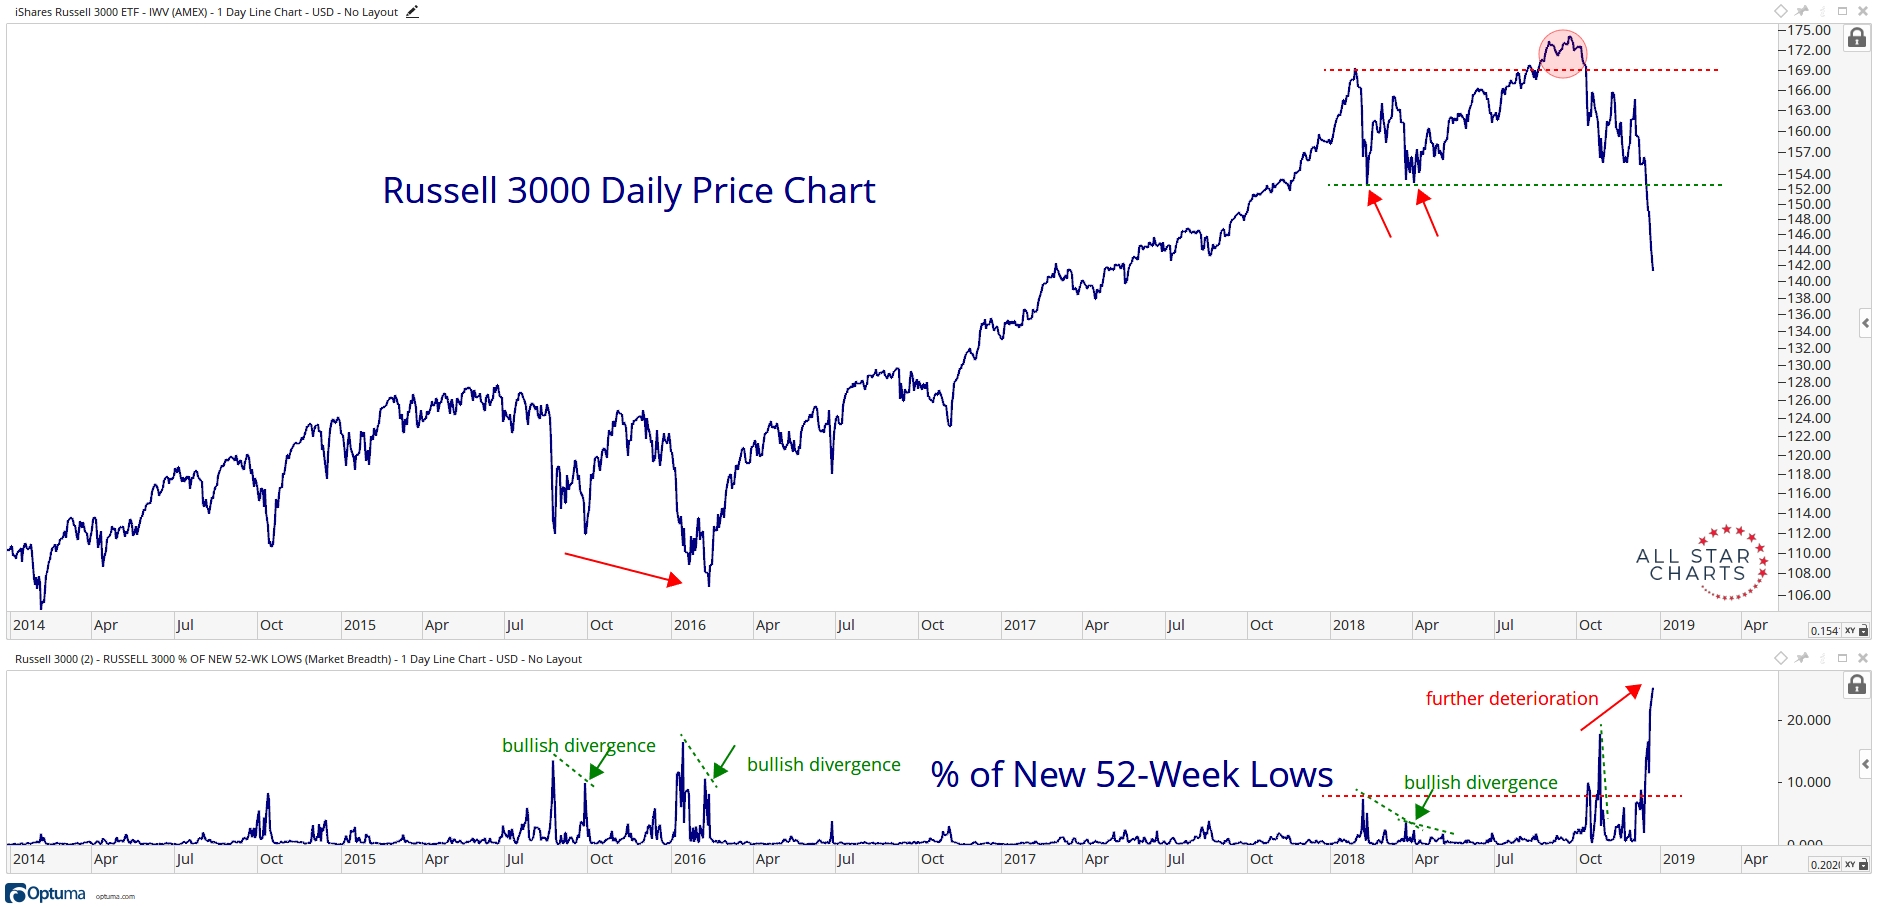 Breadth Continues To Confirm New Price Lows All Star Charts